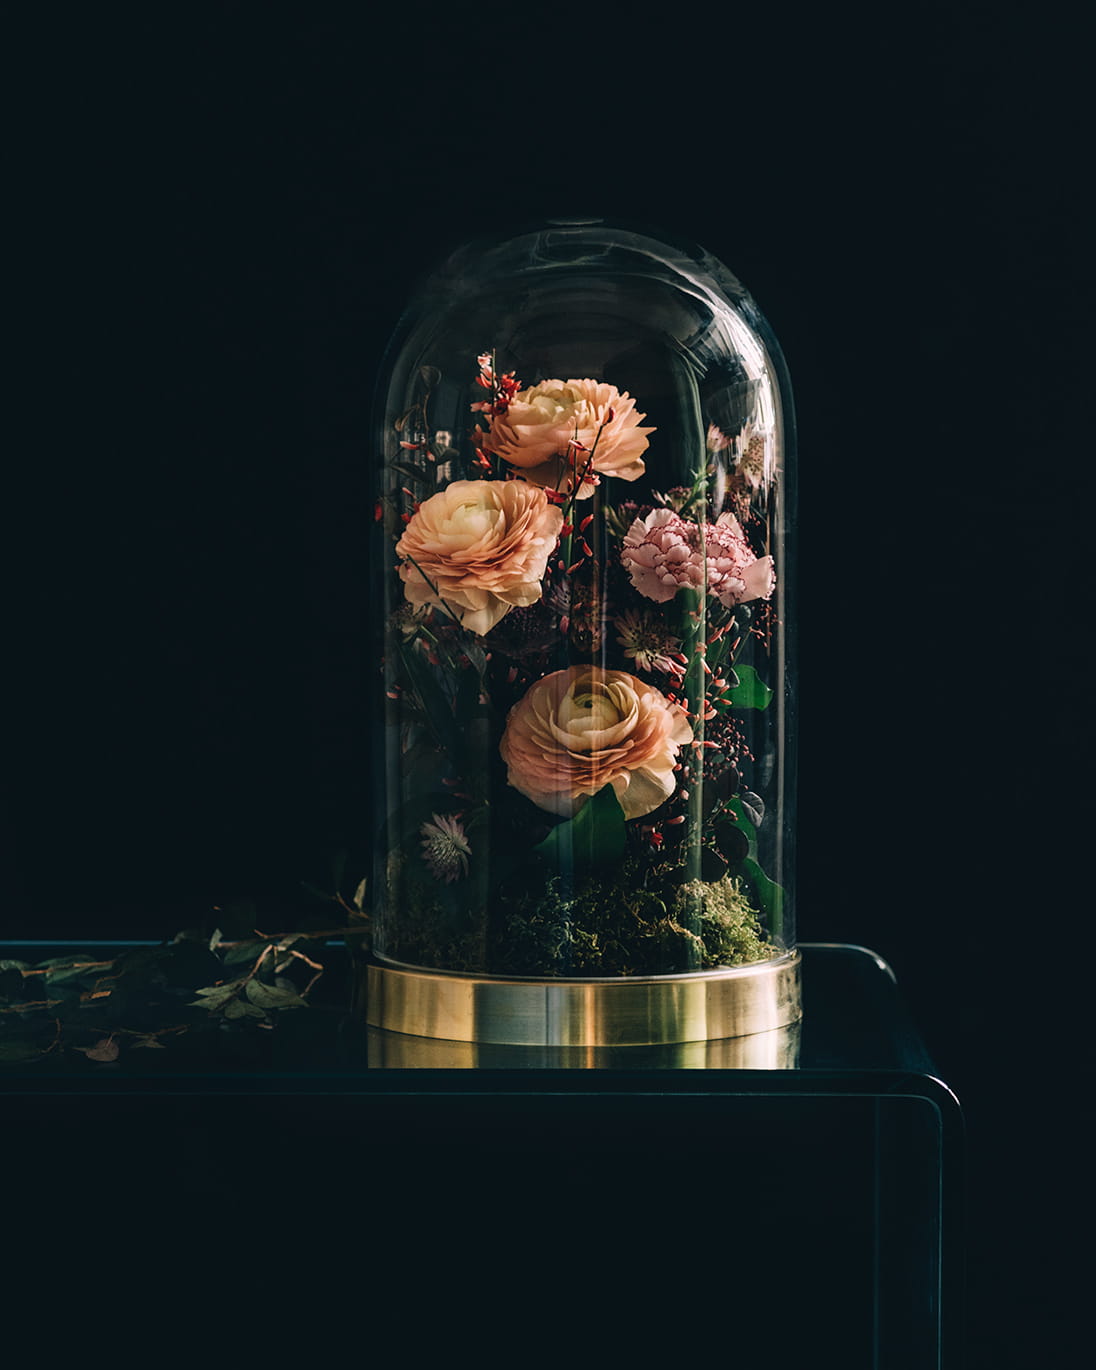 An unexpected arrangement of plump ranunculus and fresh carnations arranged within a gold-rimmed bell jar